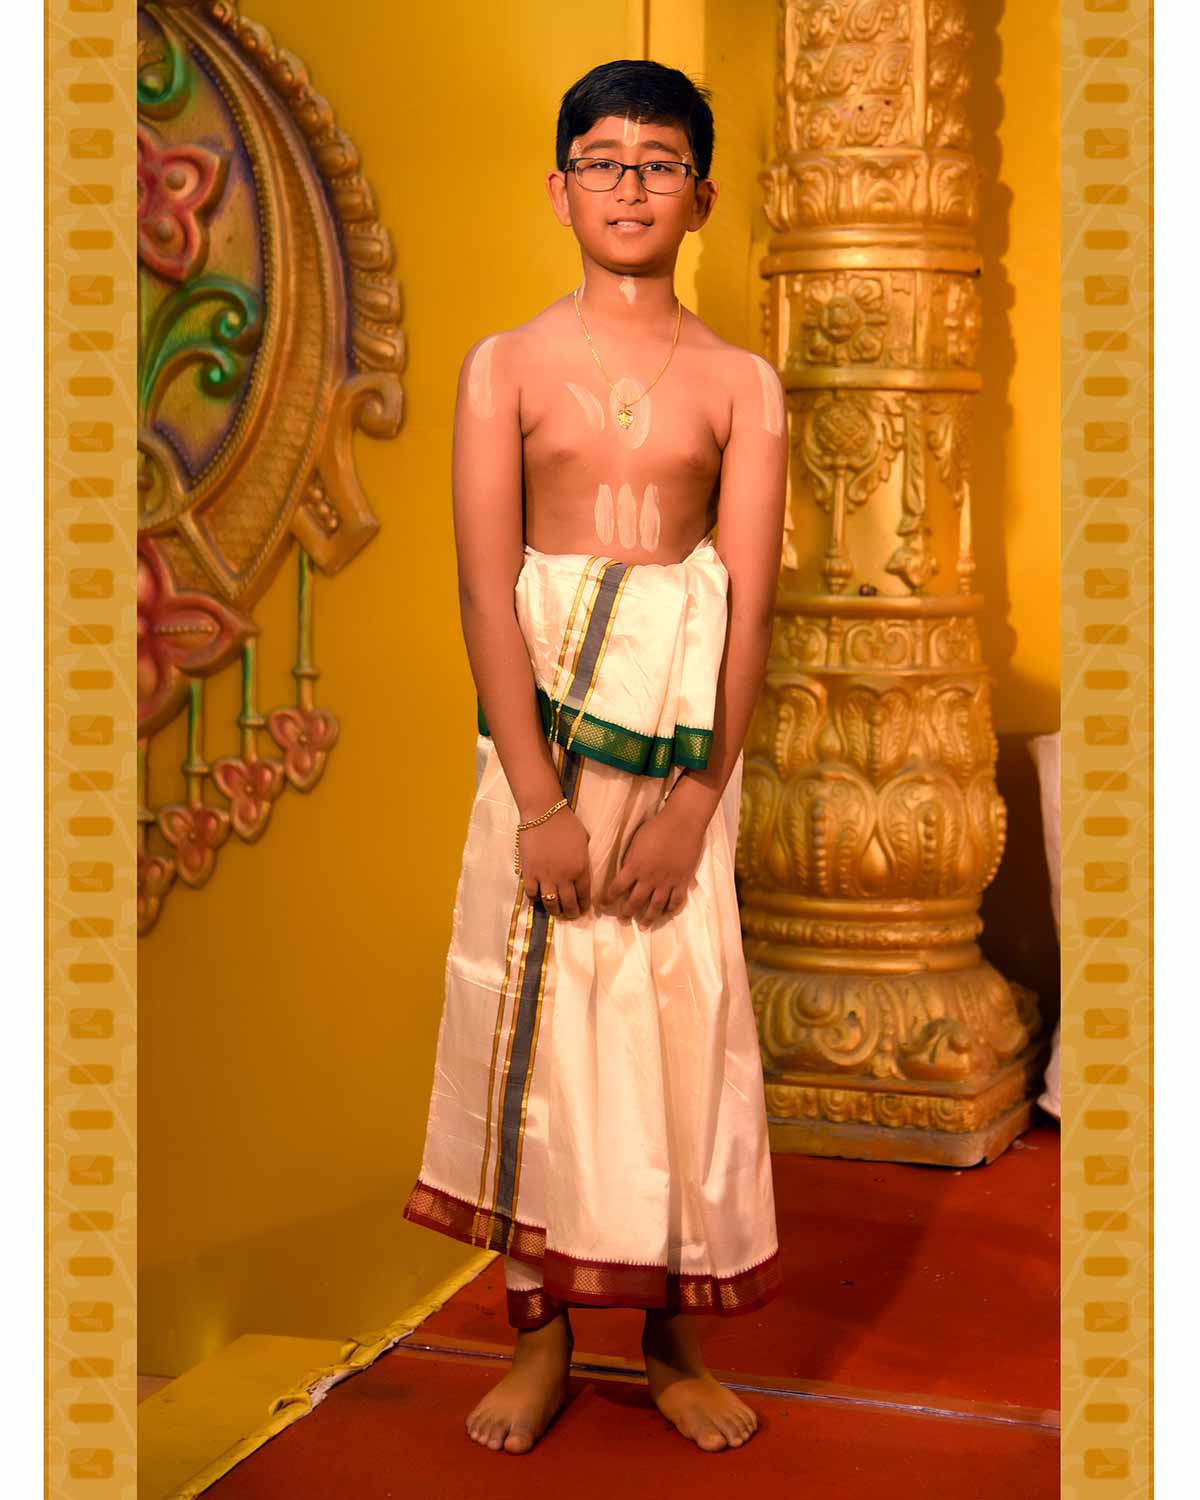 Upanayanam Photography Glimpses from Darsh's poonal function held in Chennai